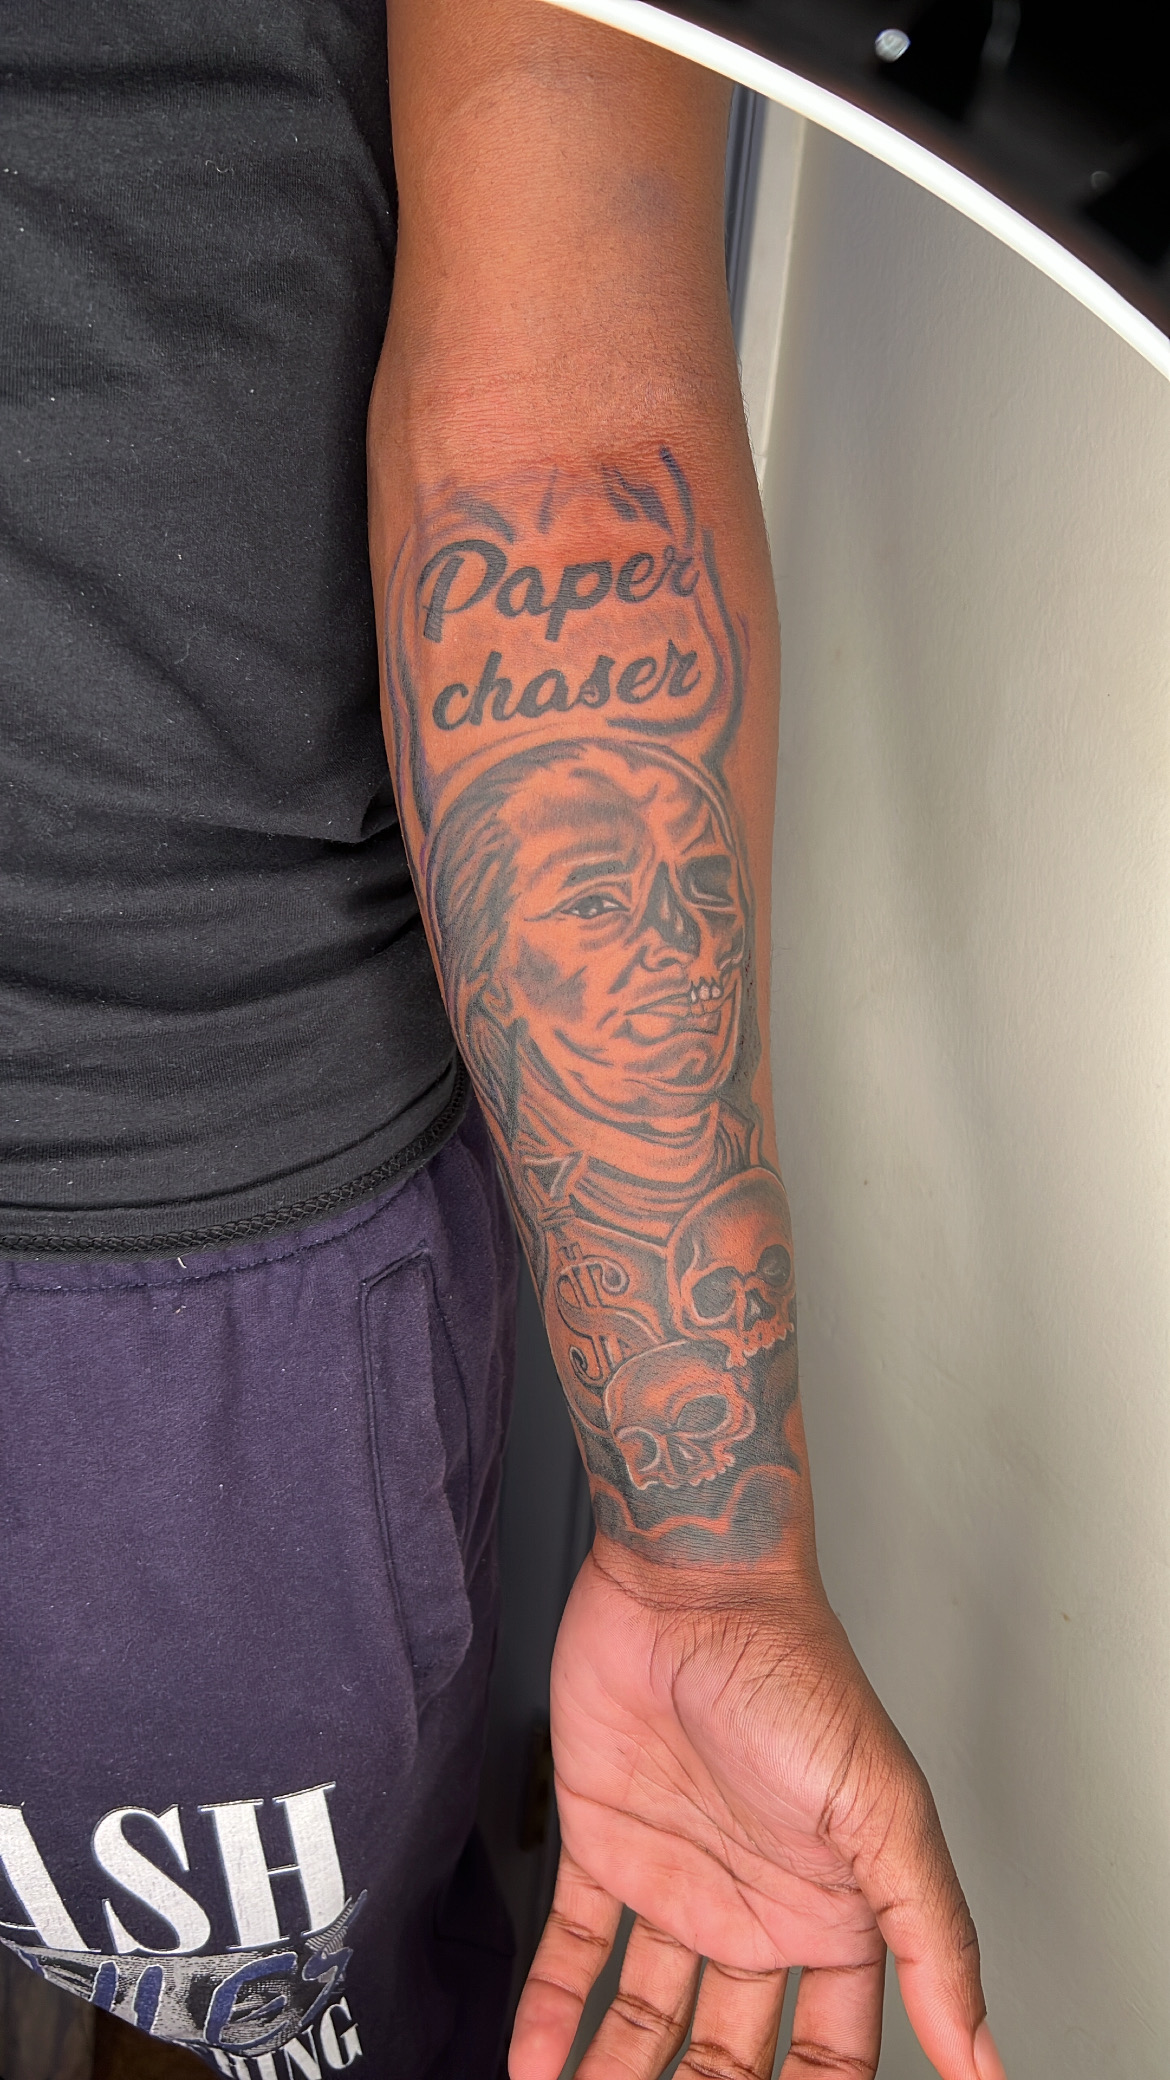 PAPERCHASERS INK  ISSUE 5 by PAPERCHASERS INK  urban tattoo magazine   Issuu